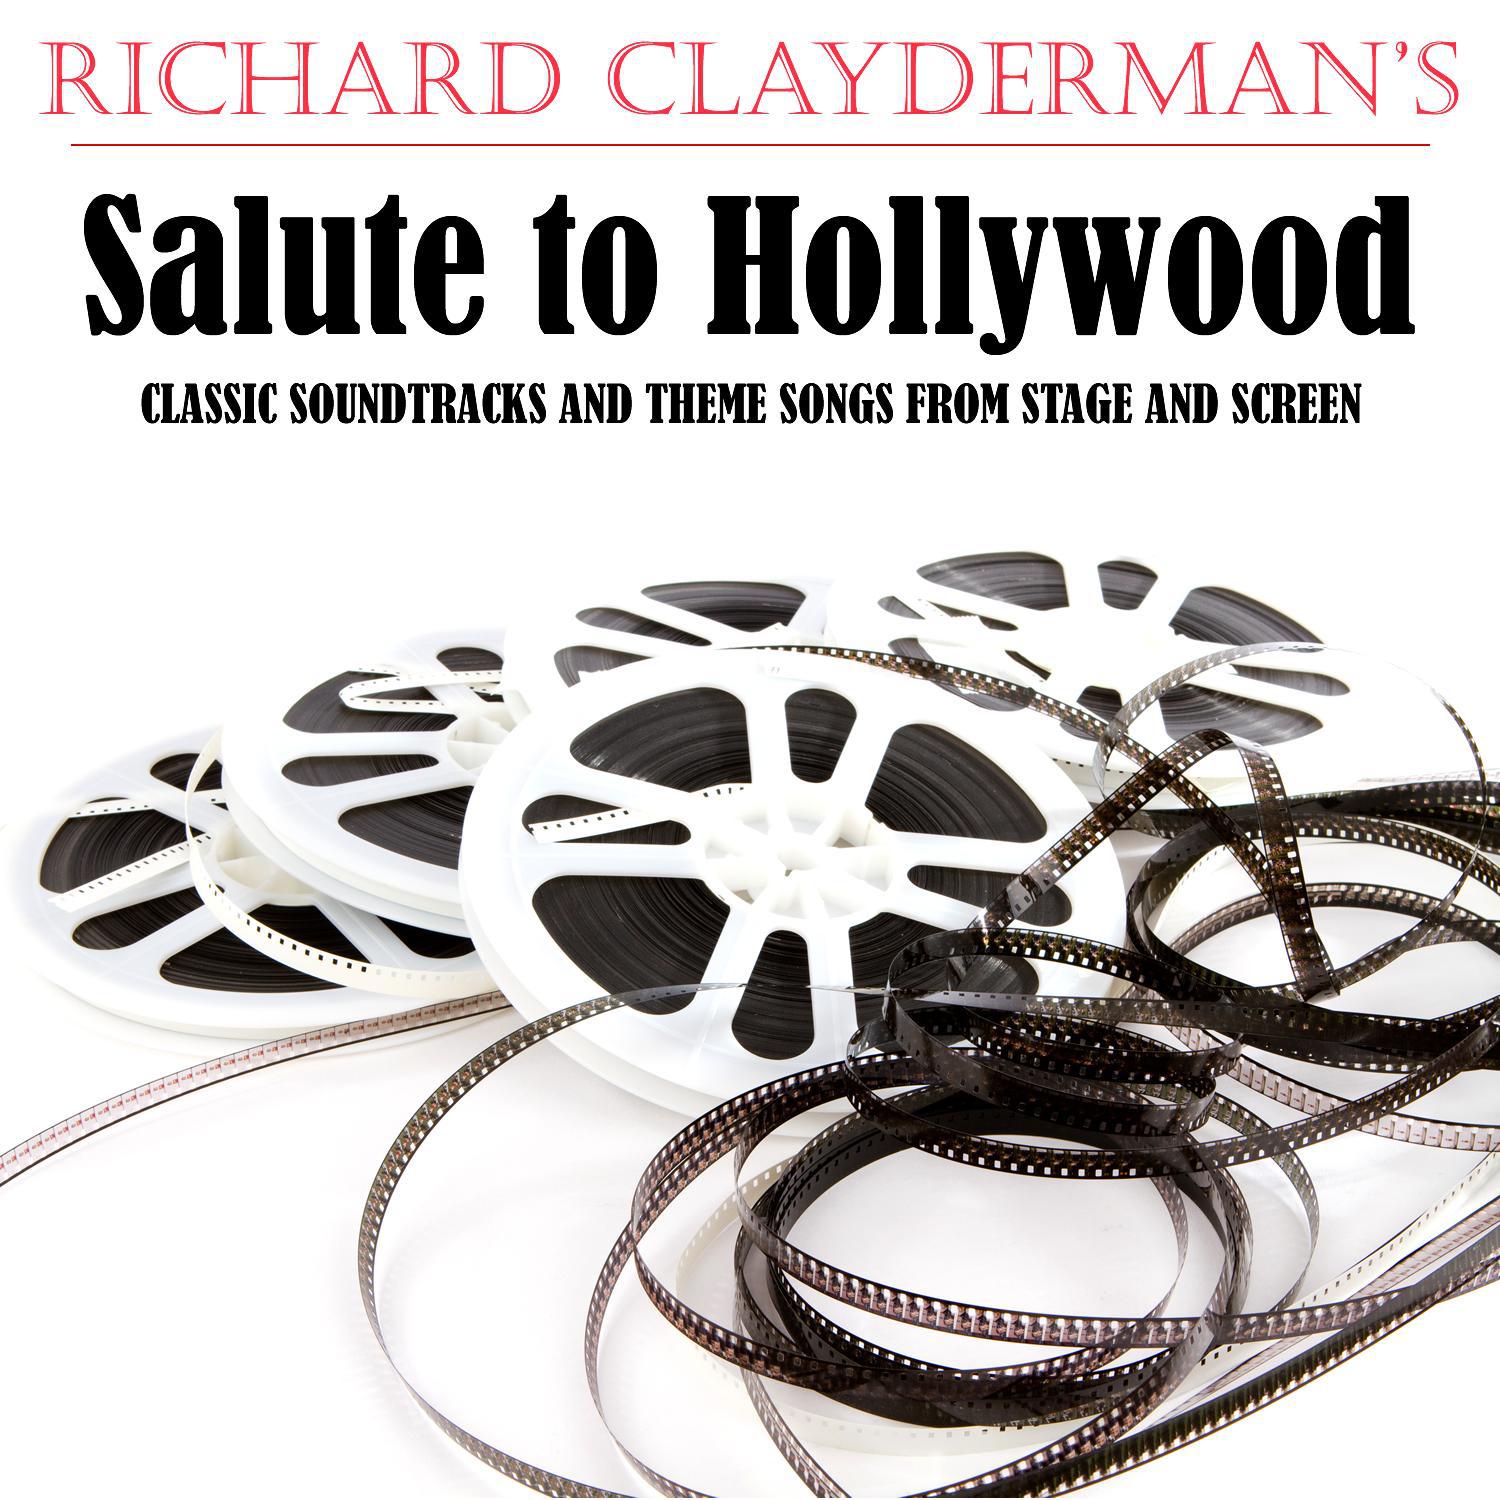 Richard Clayderman's Salute to Hollywood, Classic Soundtracks and Theme Songs from Stage and Screen